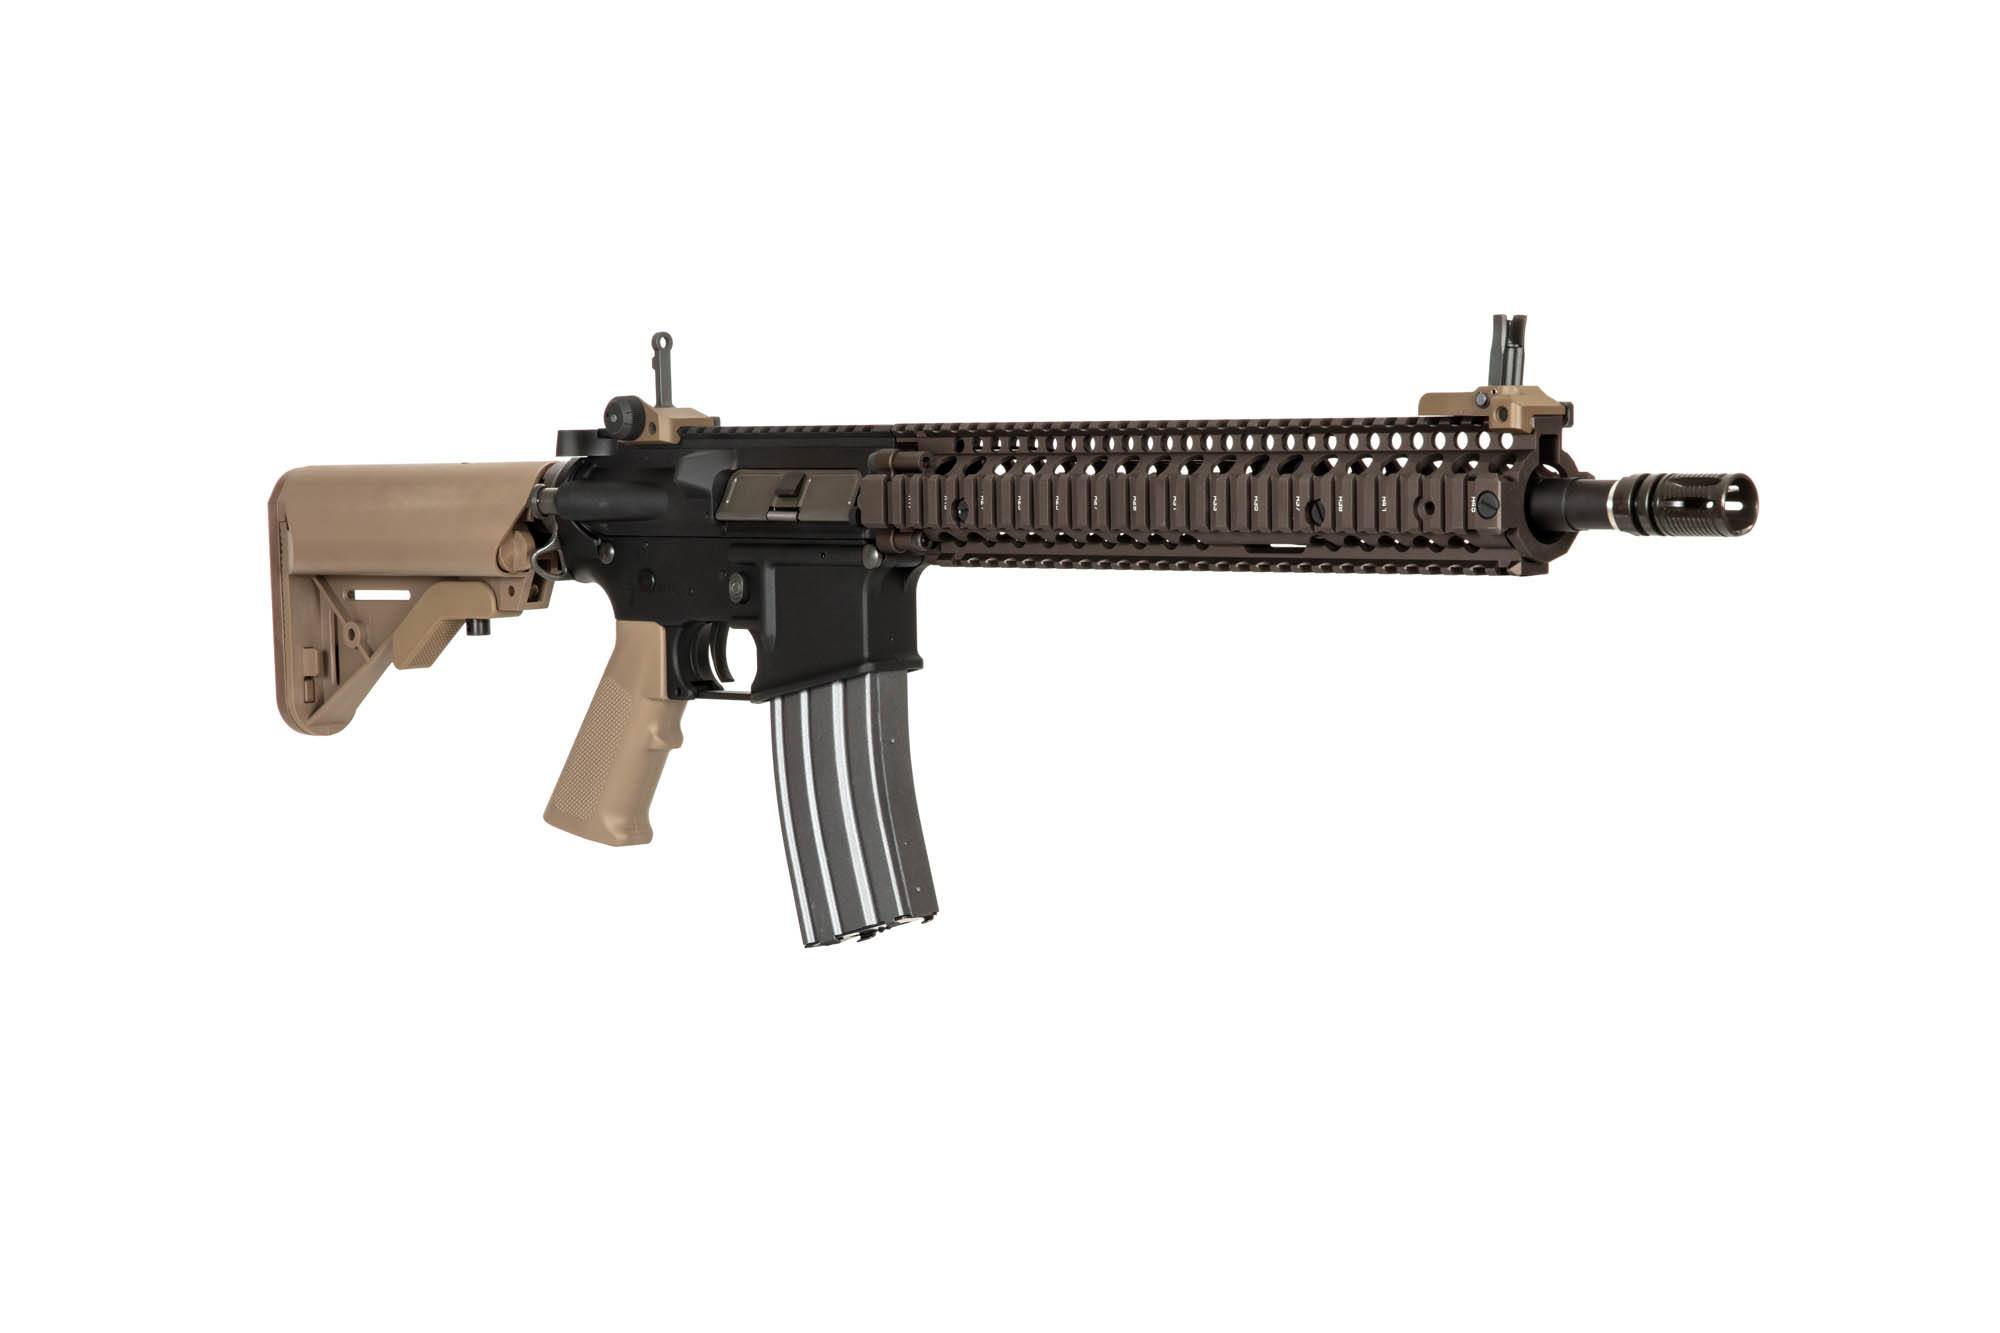 VF1-LM4RISII (Colt M4A1 RIS II) Carbine Replica - FDE by VFC on Airsoft Mania Europe